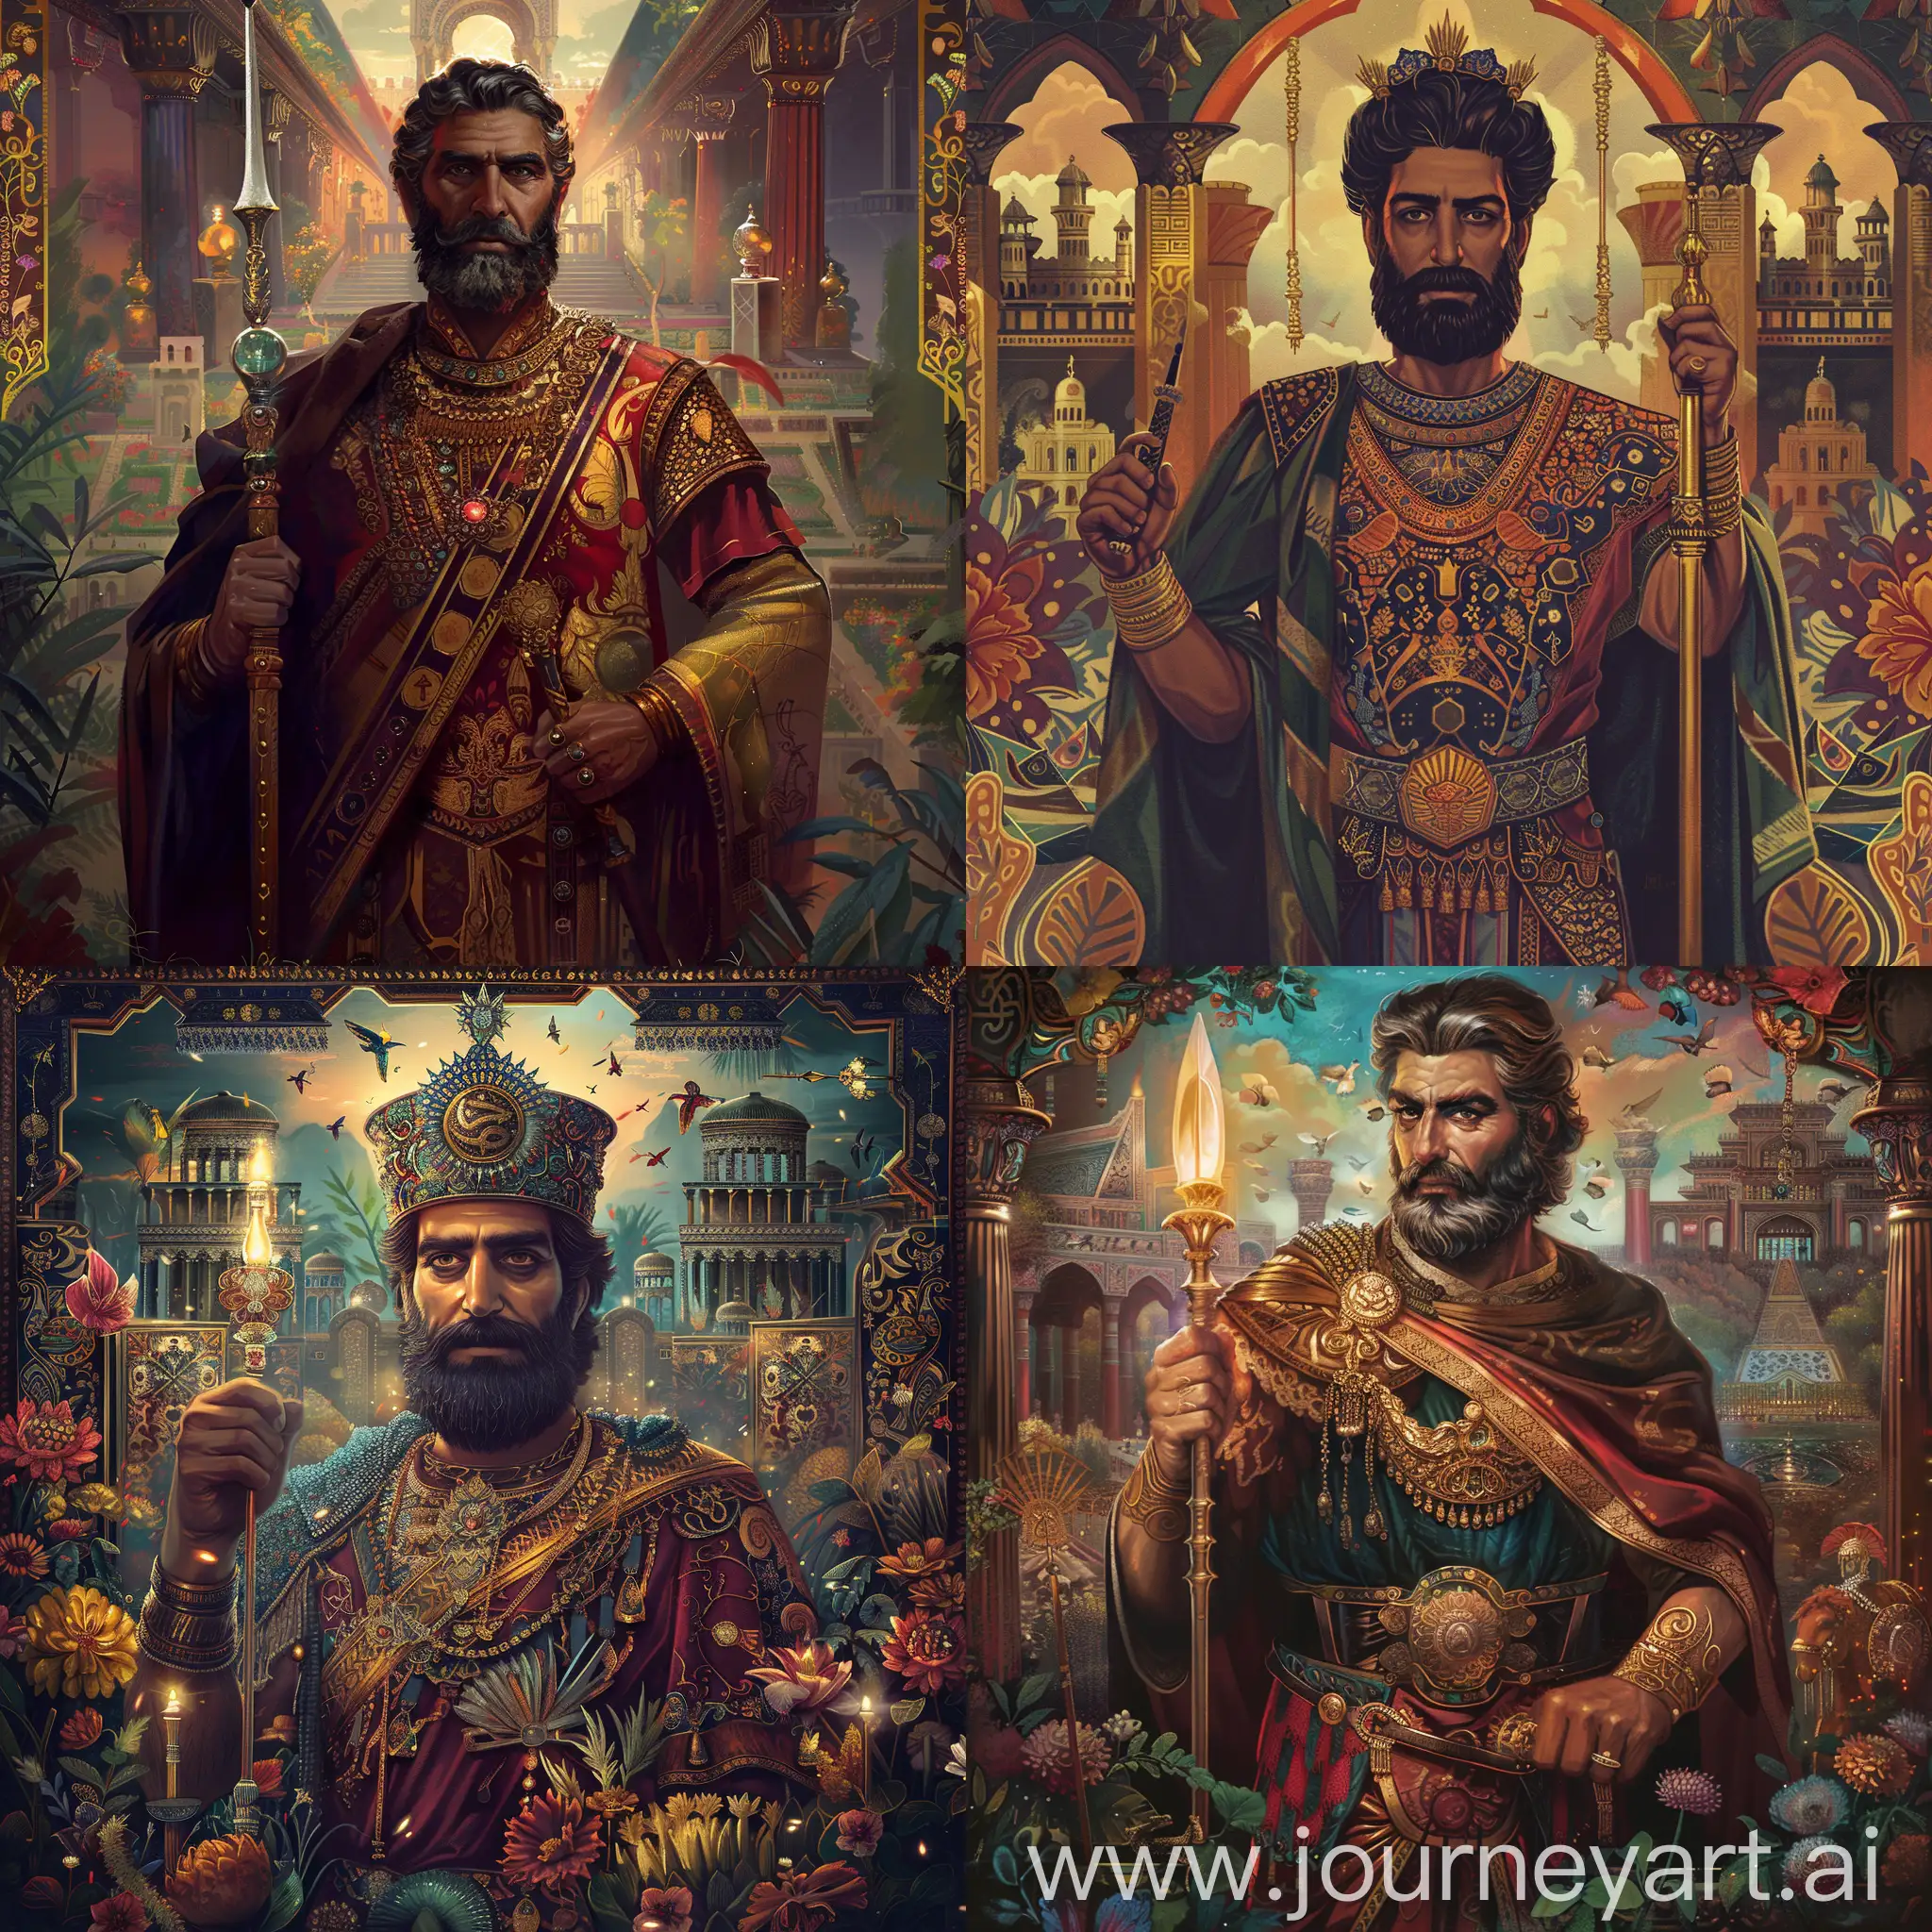 Create a portrait of Cyrus the Great, the founder of the Achaemenid Empire, depicting him in regal attire with a confident expression, perhaps holding a scepter or sword to symbolize his leadership and military prowess. Surround him with elements representing the Persian Empire's cultural and architectural achievements, such as palaces, gardens, and intricate patterns. Ensure the lighting highlights his features and adds a sense of grandeur to the scene.